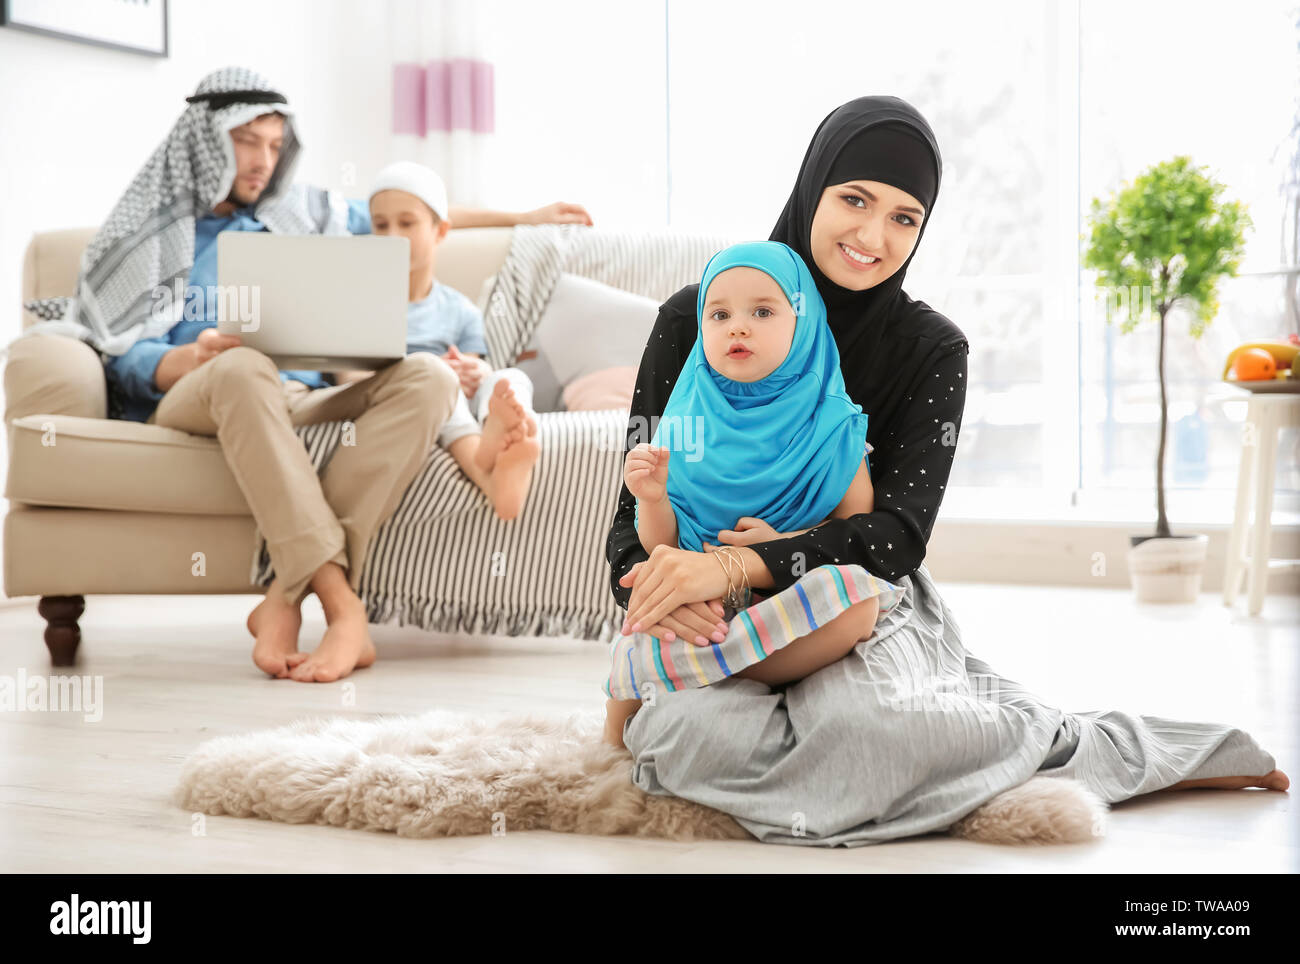 Happy Muslim family spending time together at home Stock Photo